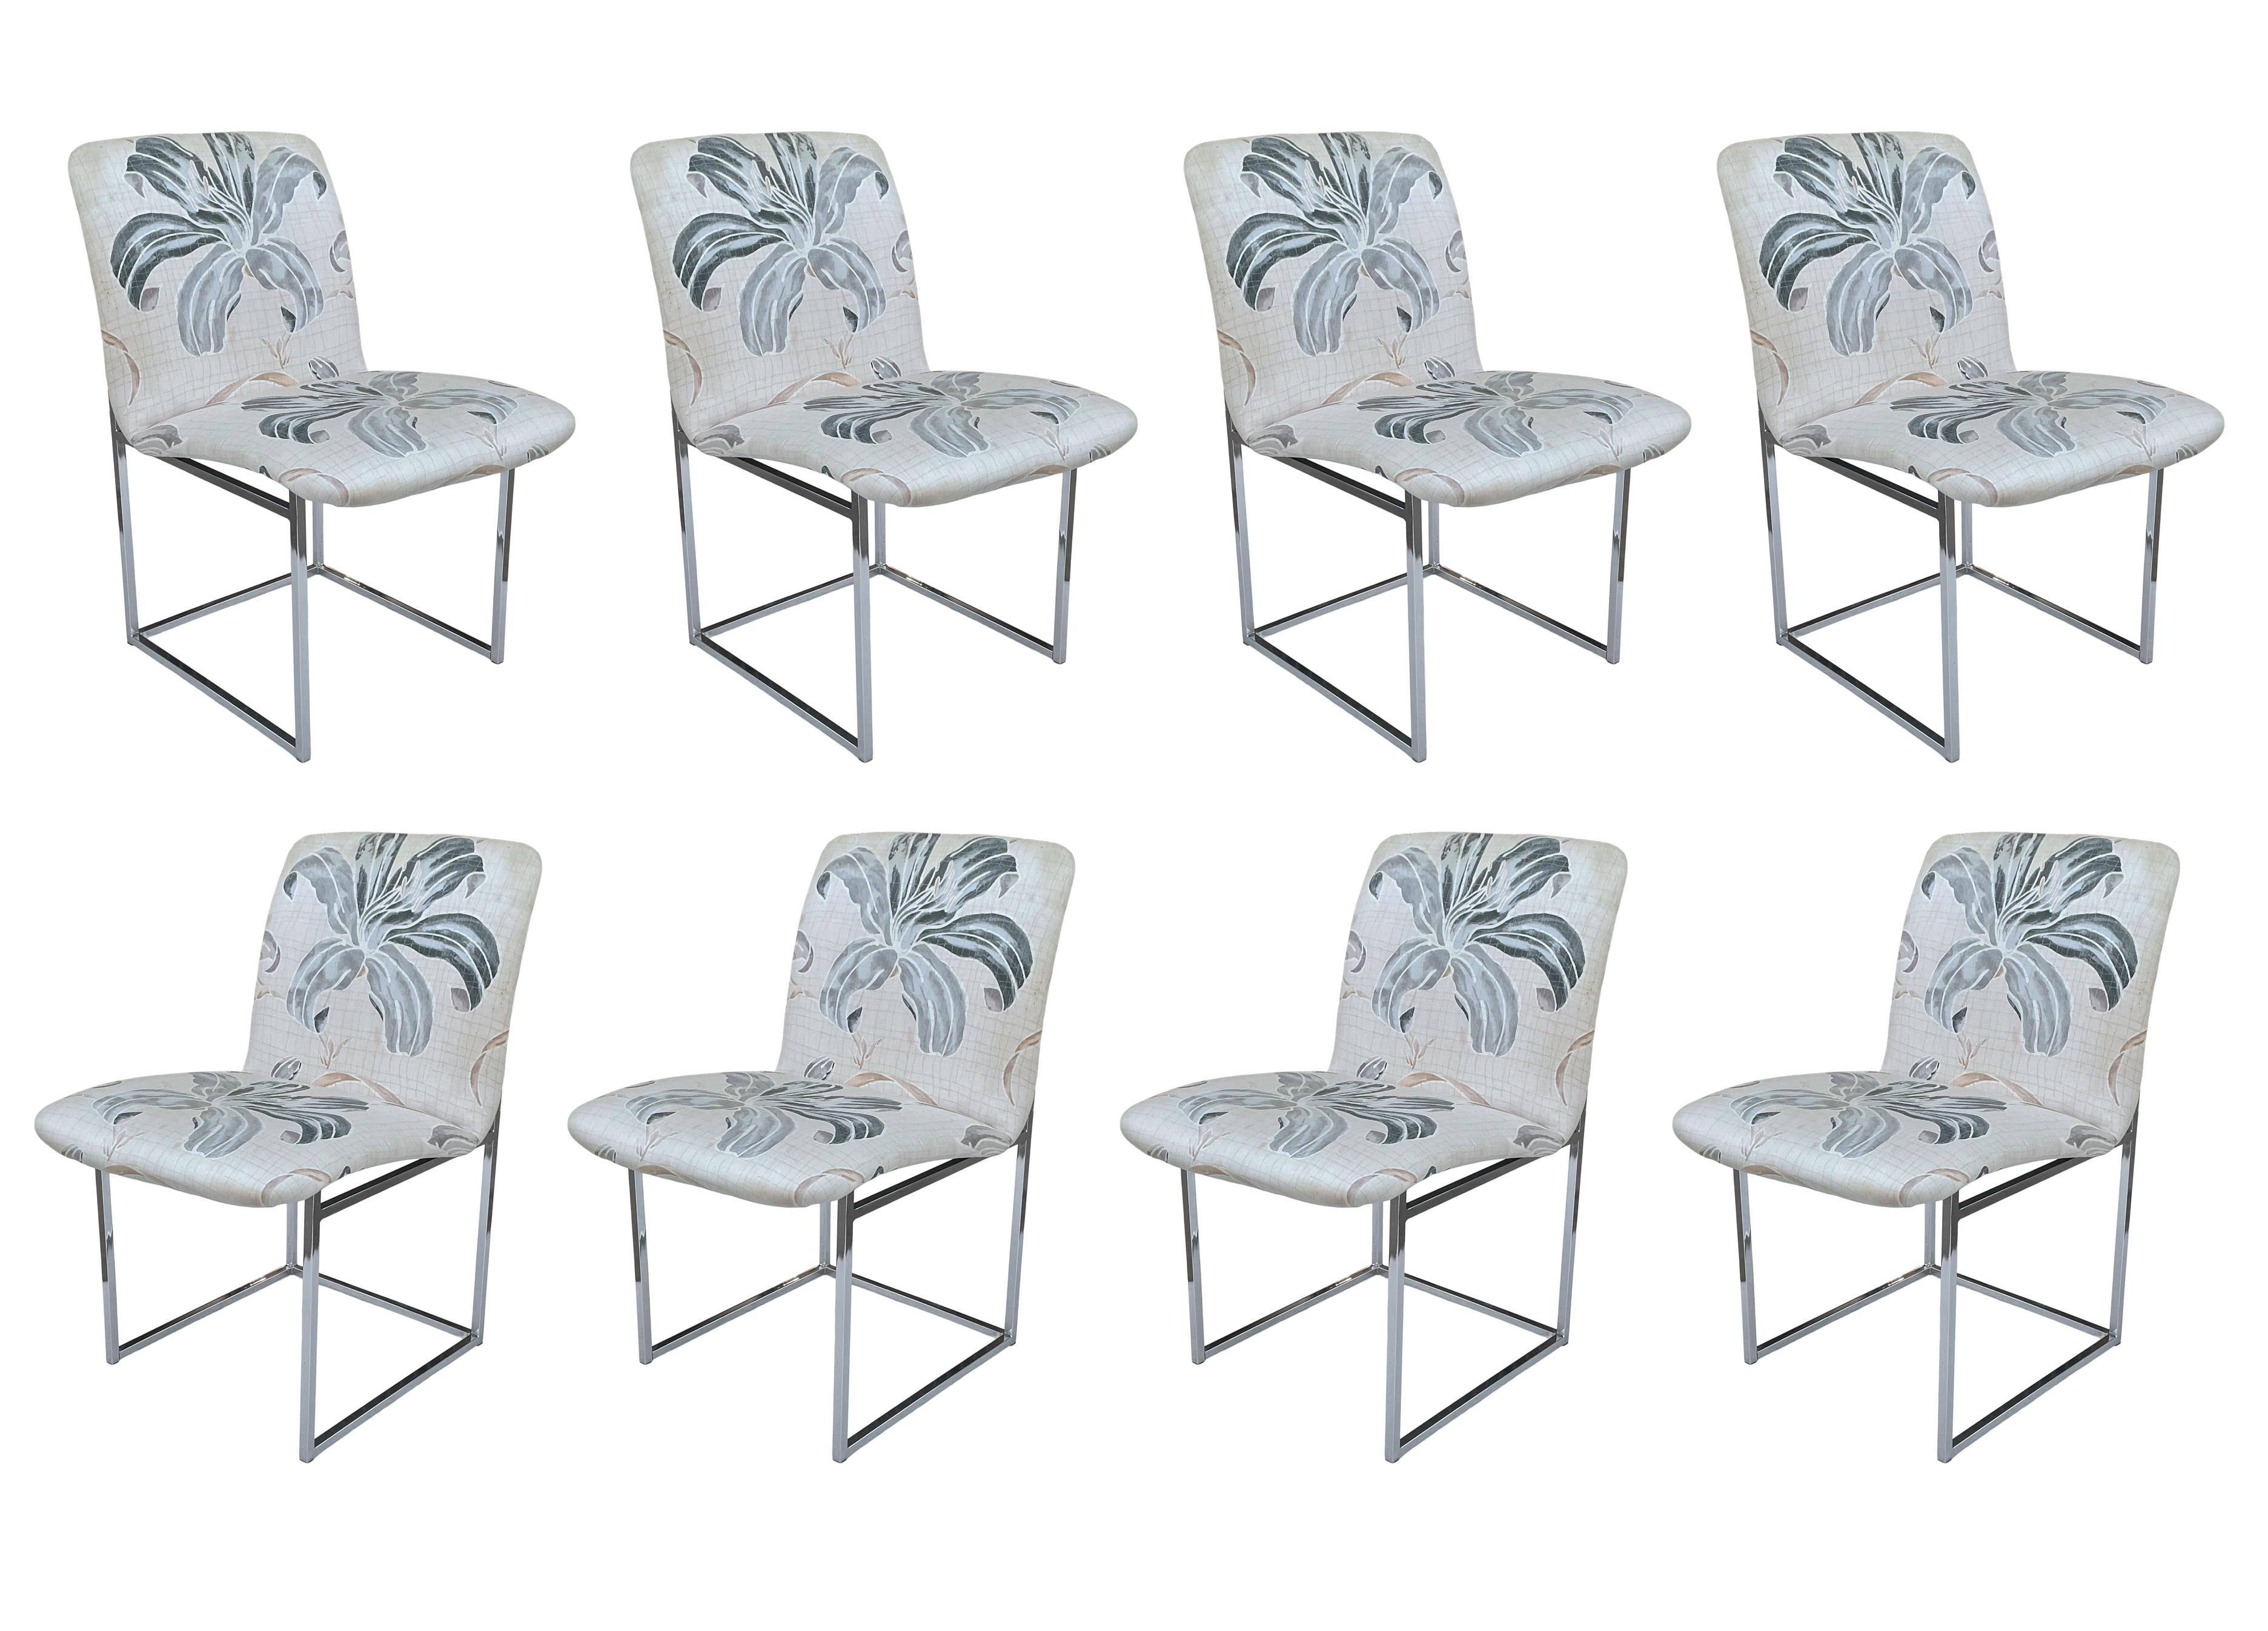 Fabric Set of Eight Mid-Century Modern Chrome Dining Chairs by Milo Baughman